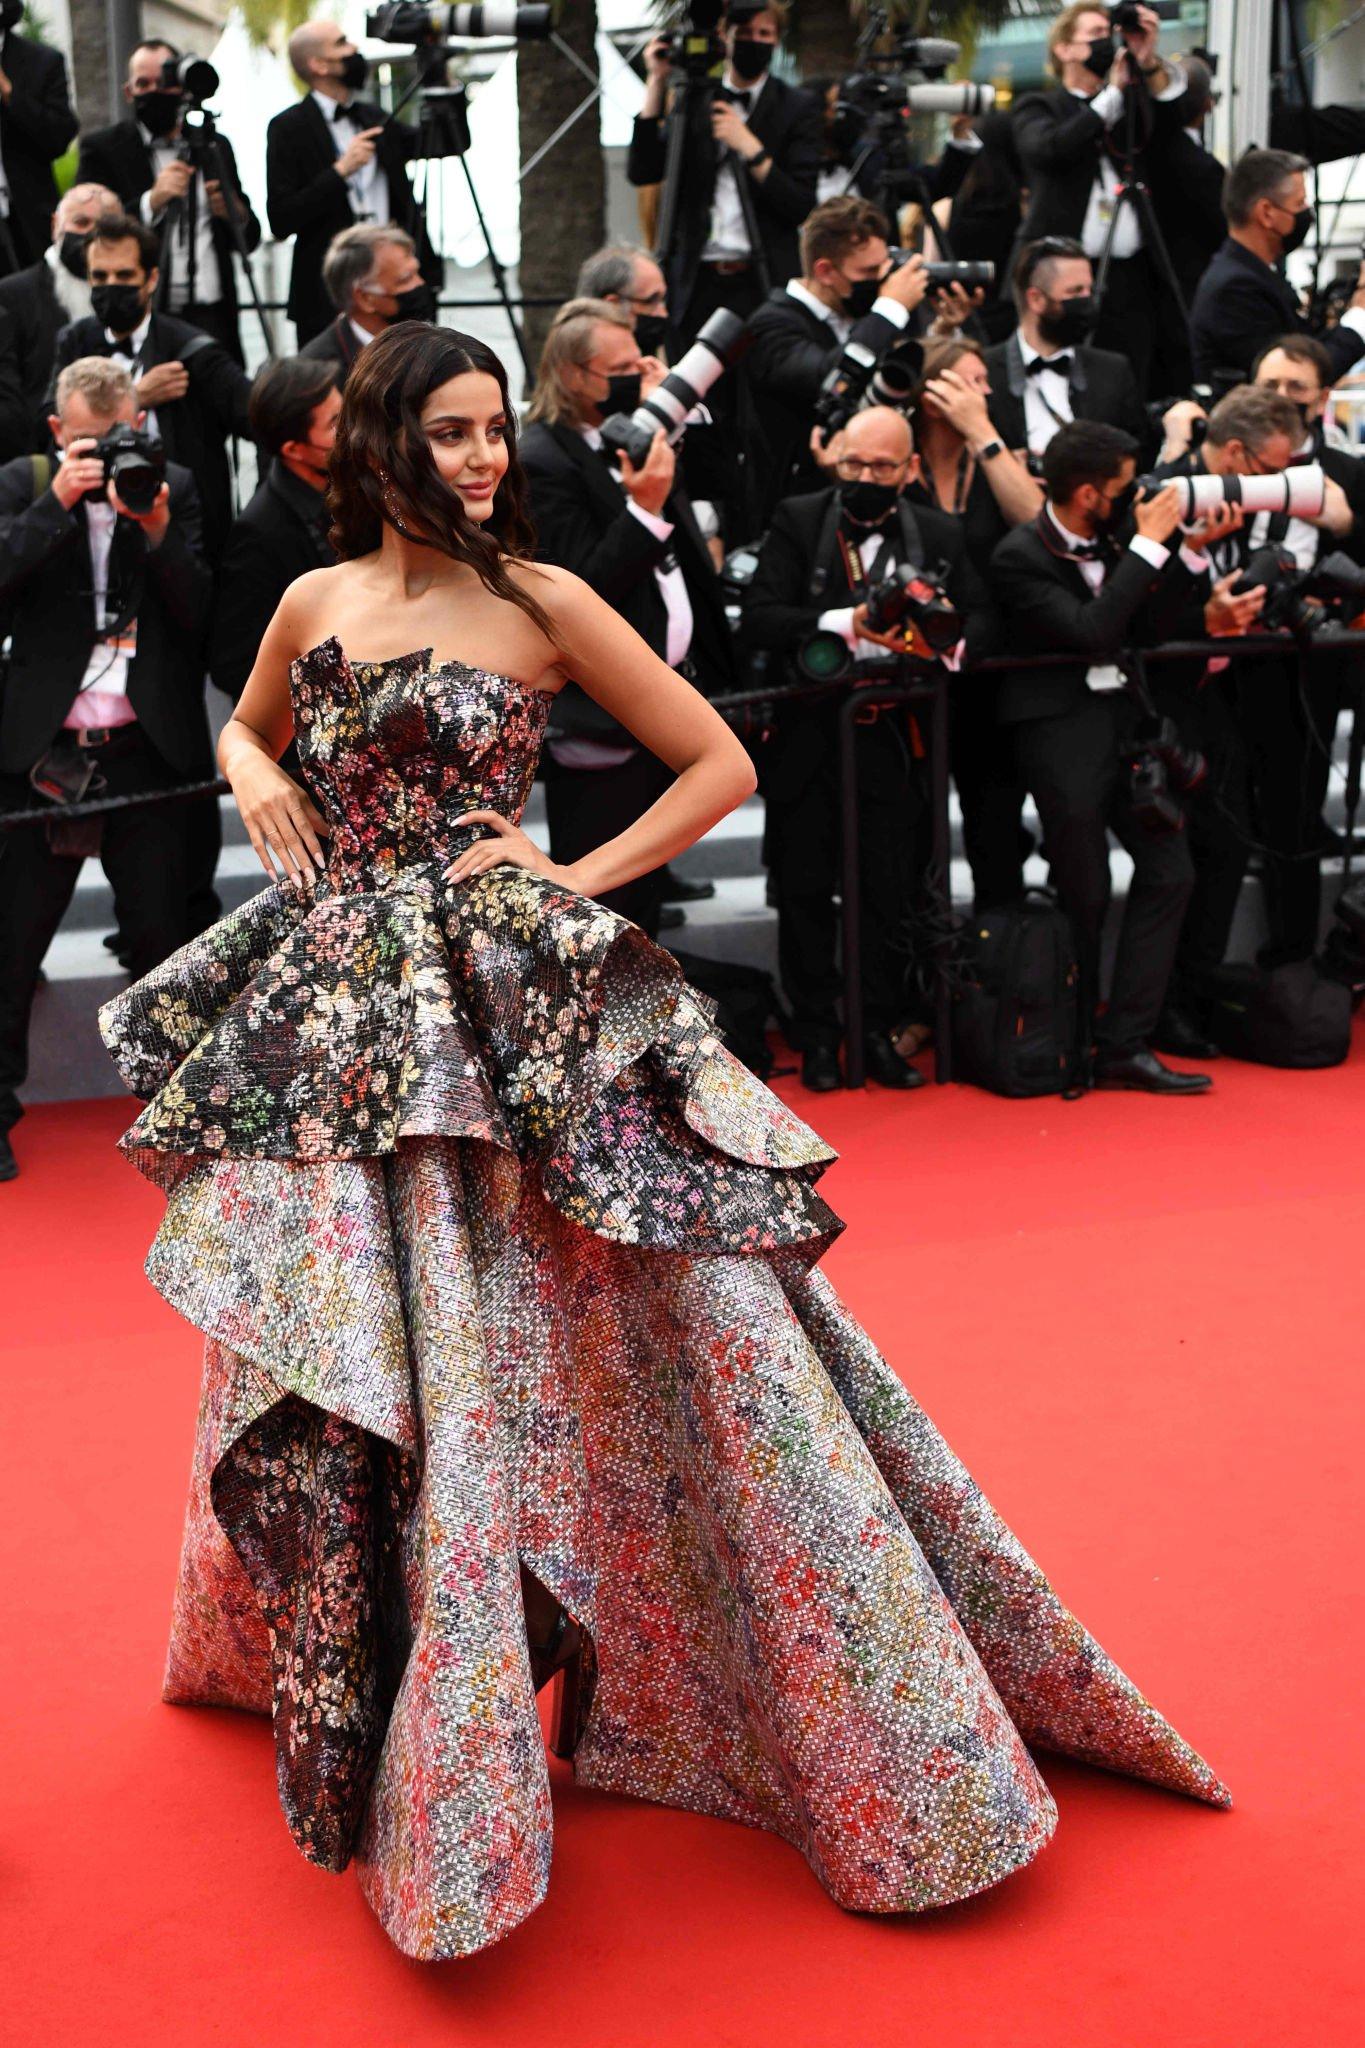 Mahlagha Jaberi at the premiere of "The French Dispatch" - Cannes Film Festival 